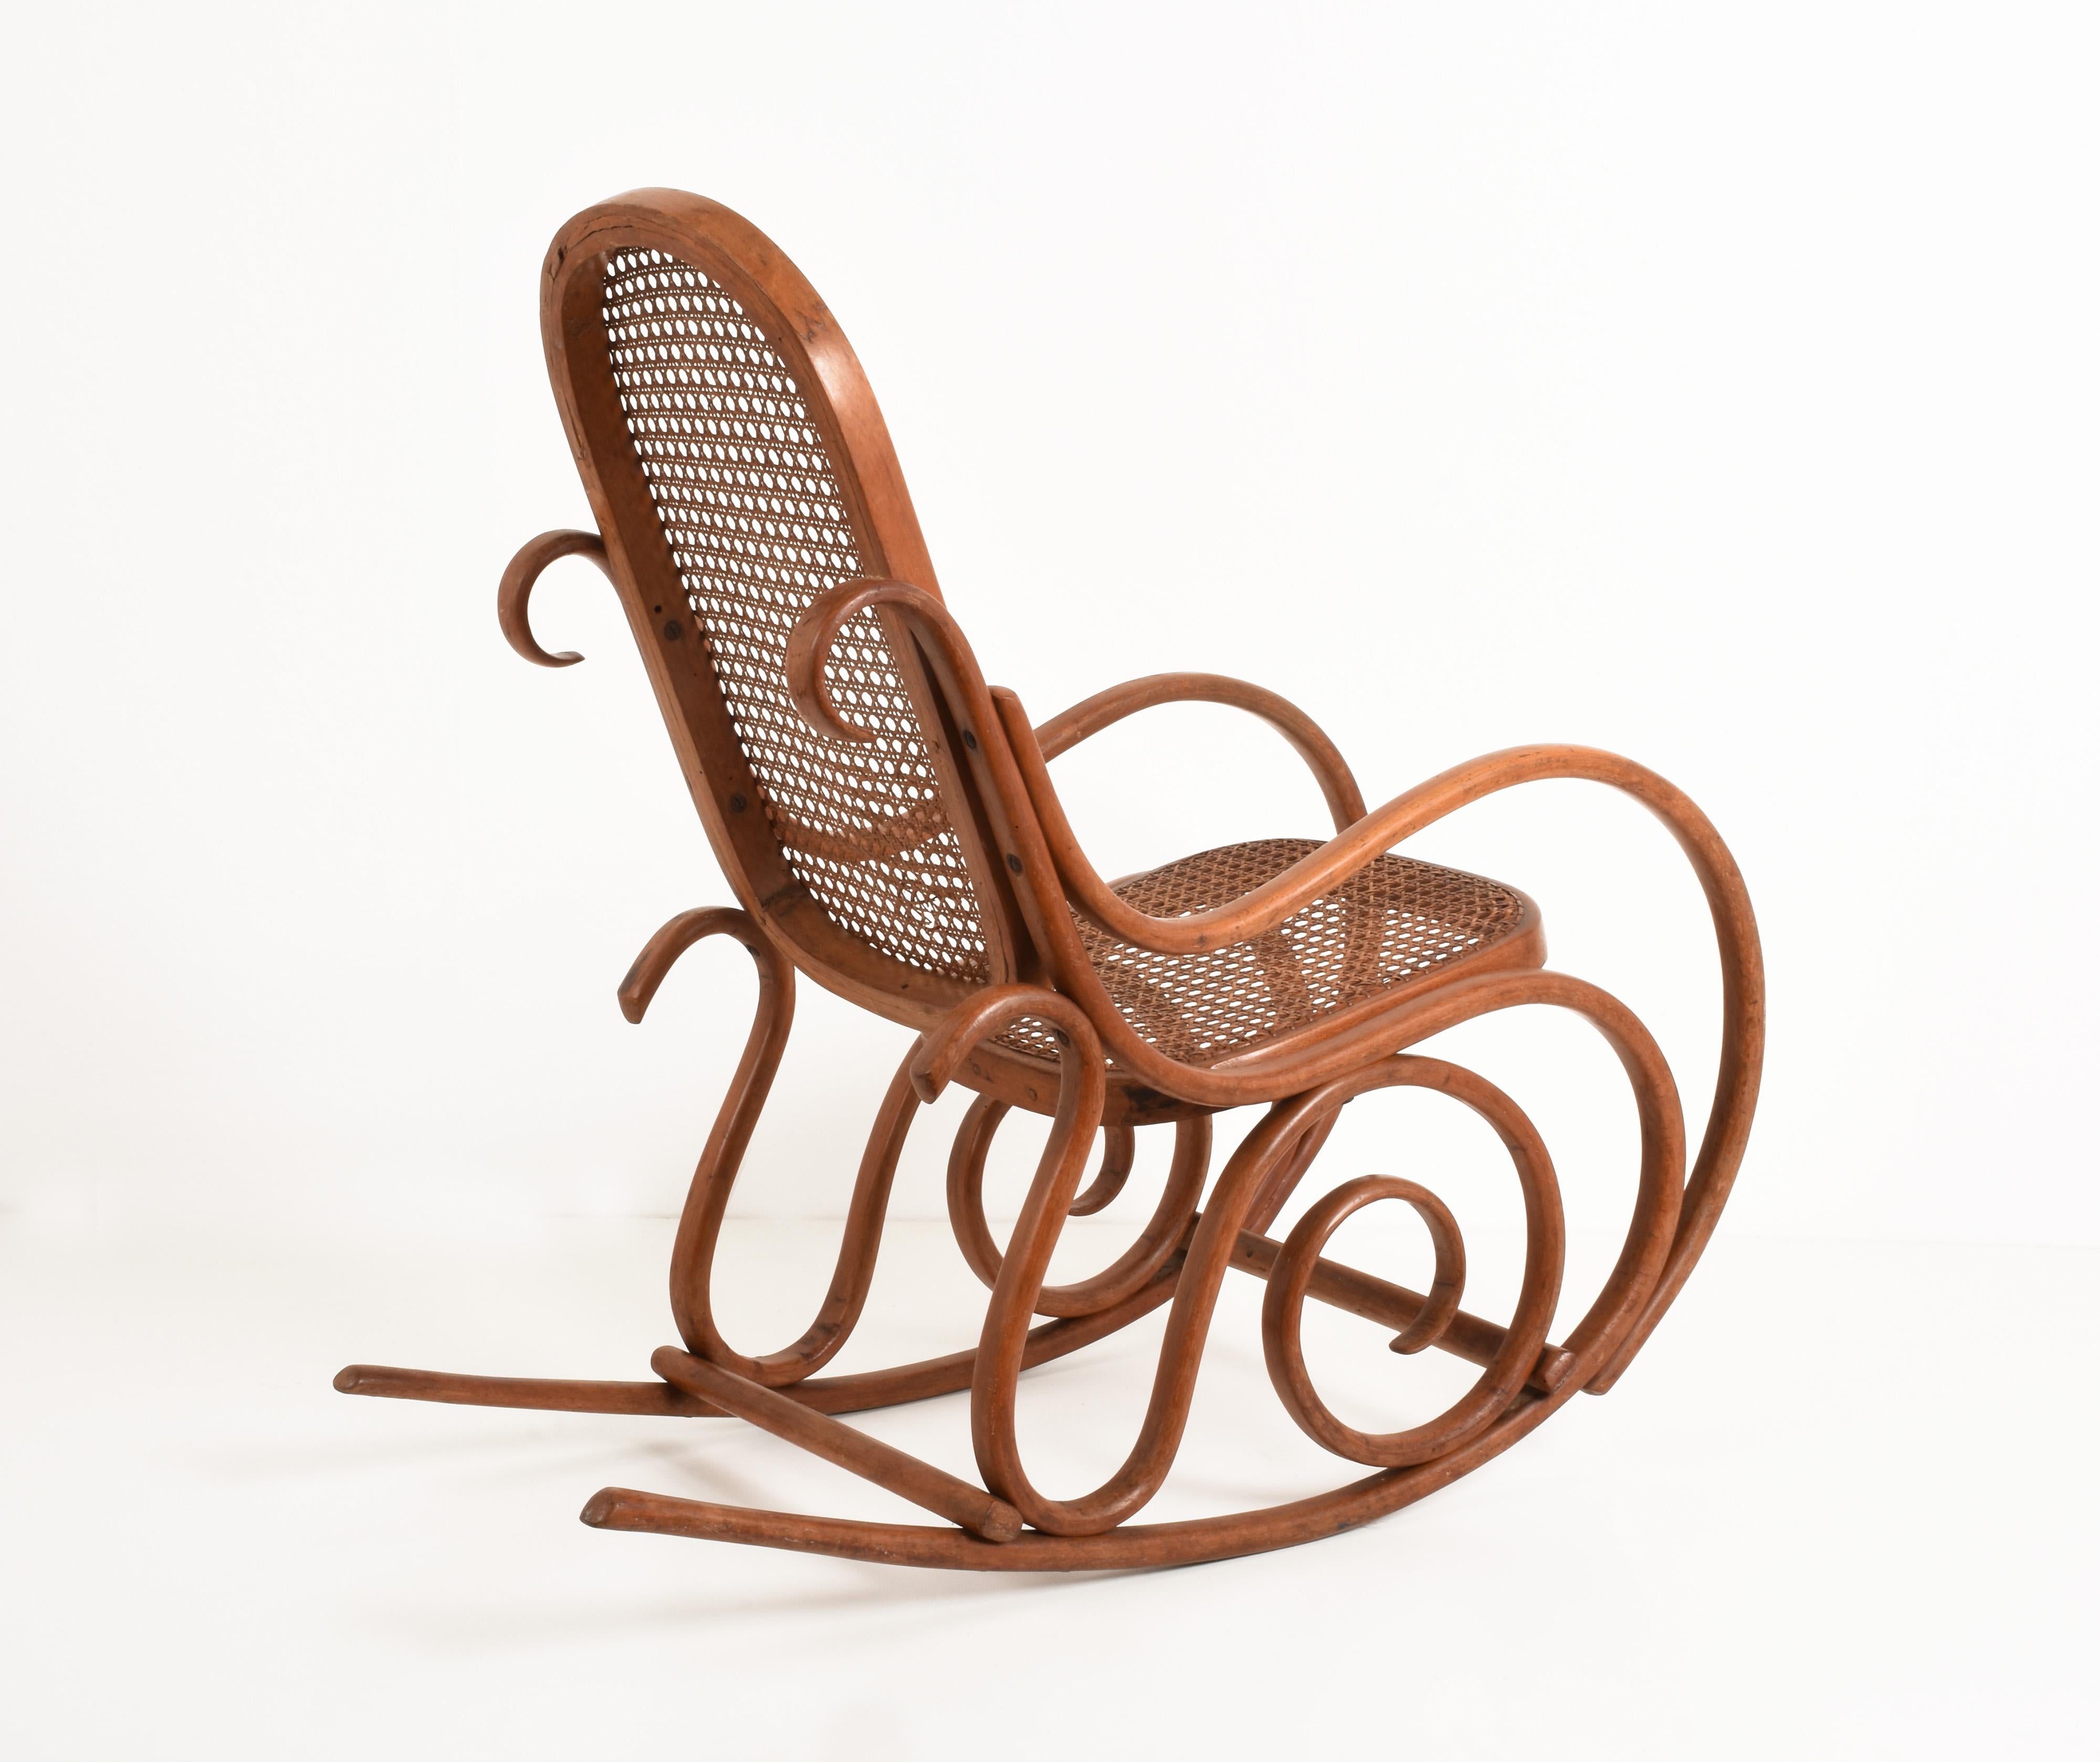 Italian Thonet. A Vintage Bentwood Child's Rocking Chair with Cane Back and Seat, 1930s